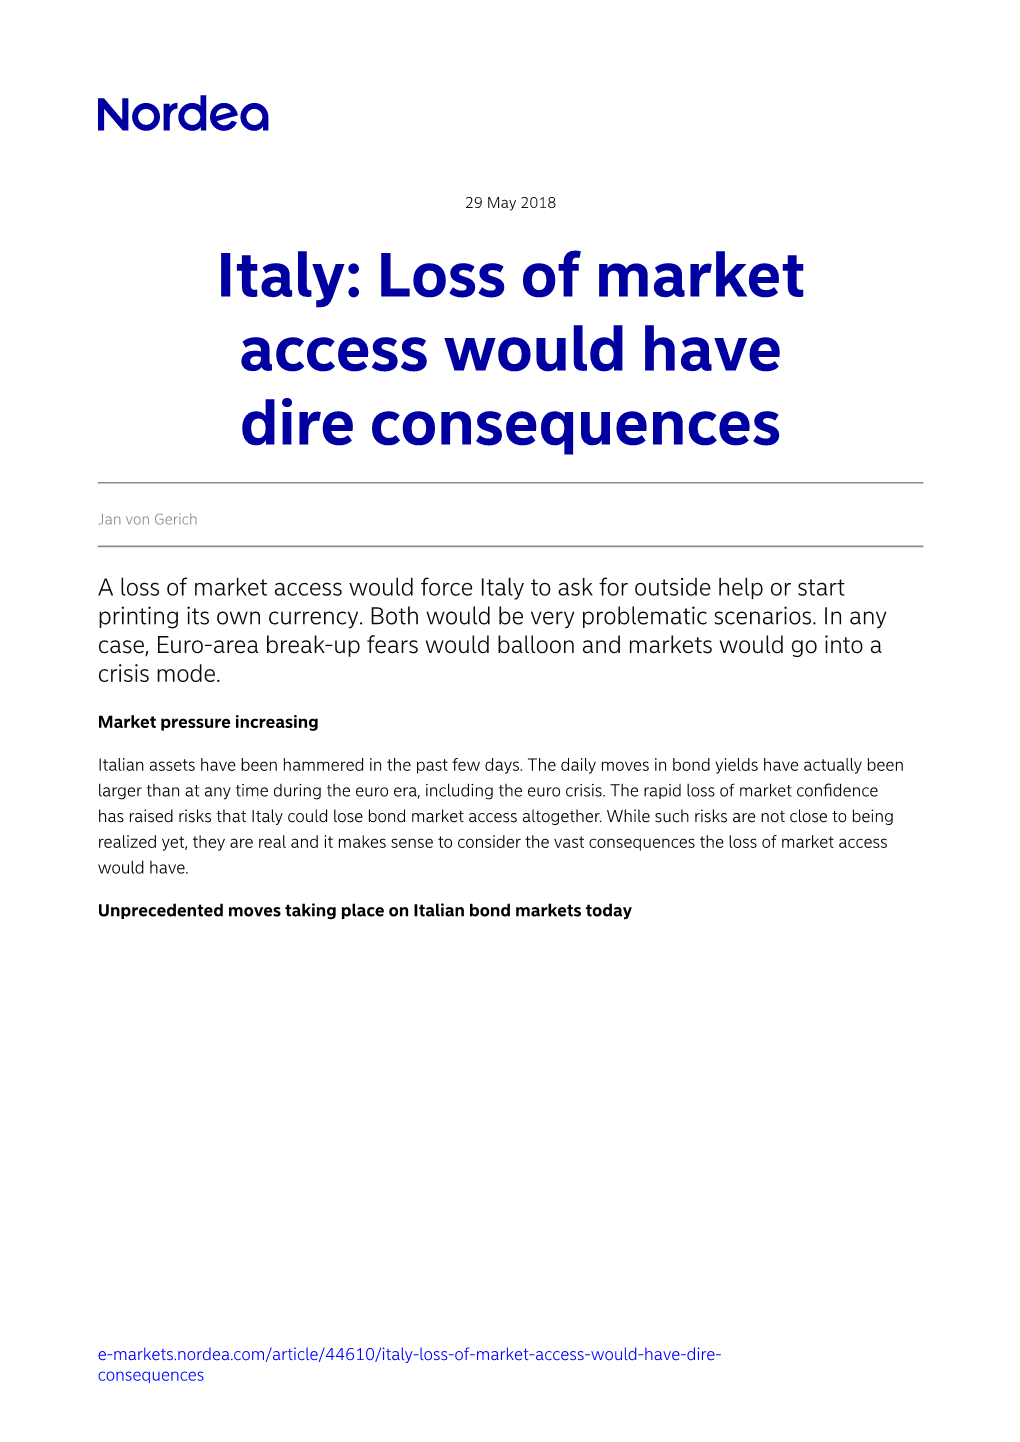 Italy: Loss of Market Access Would Have Dire Consequences